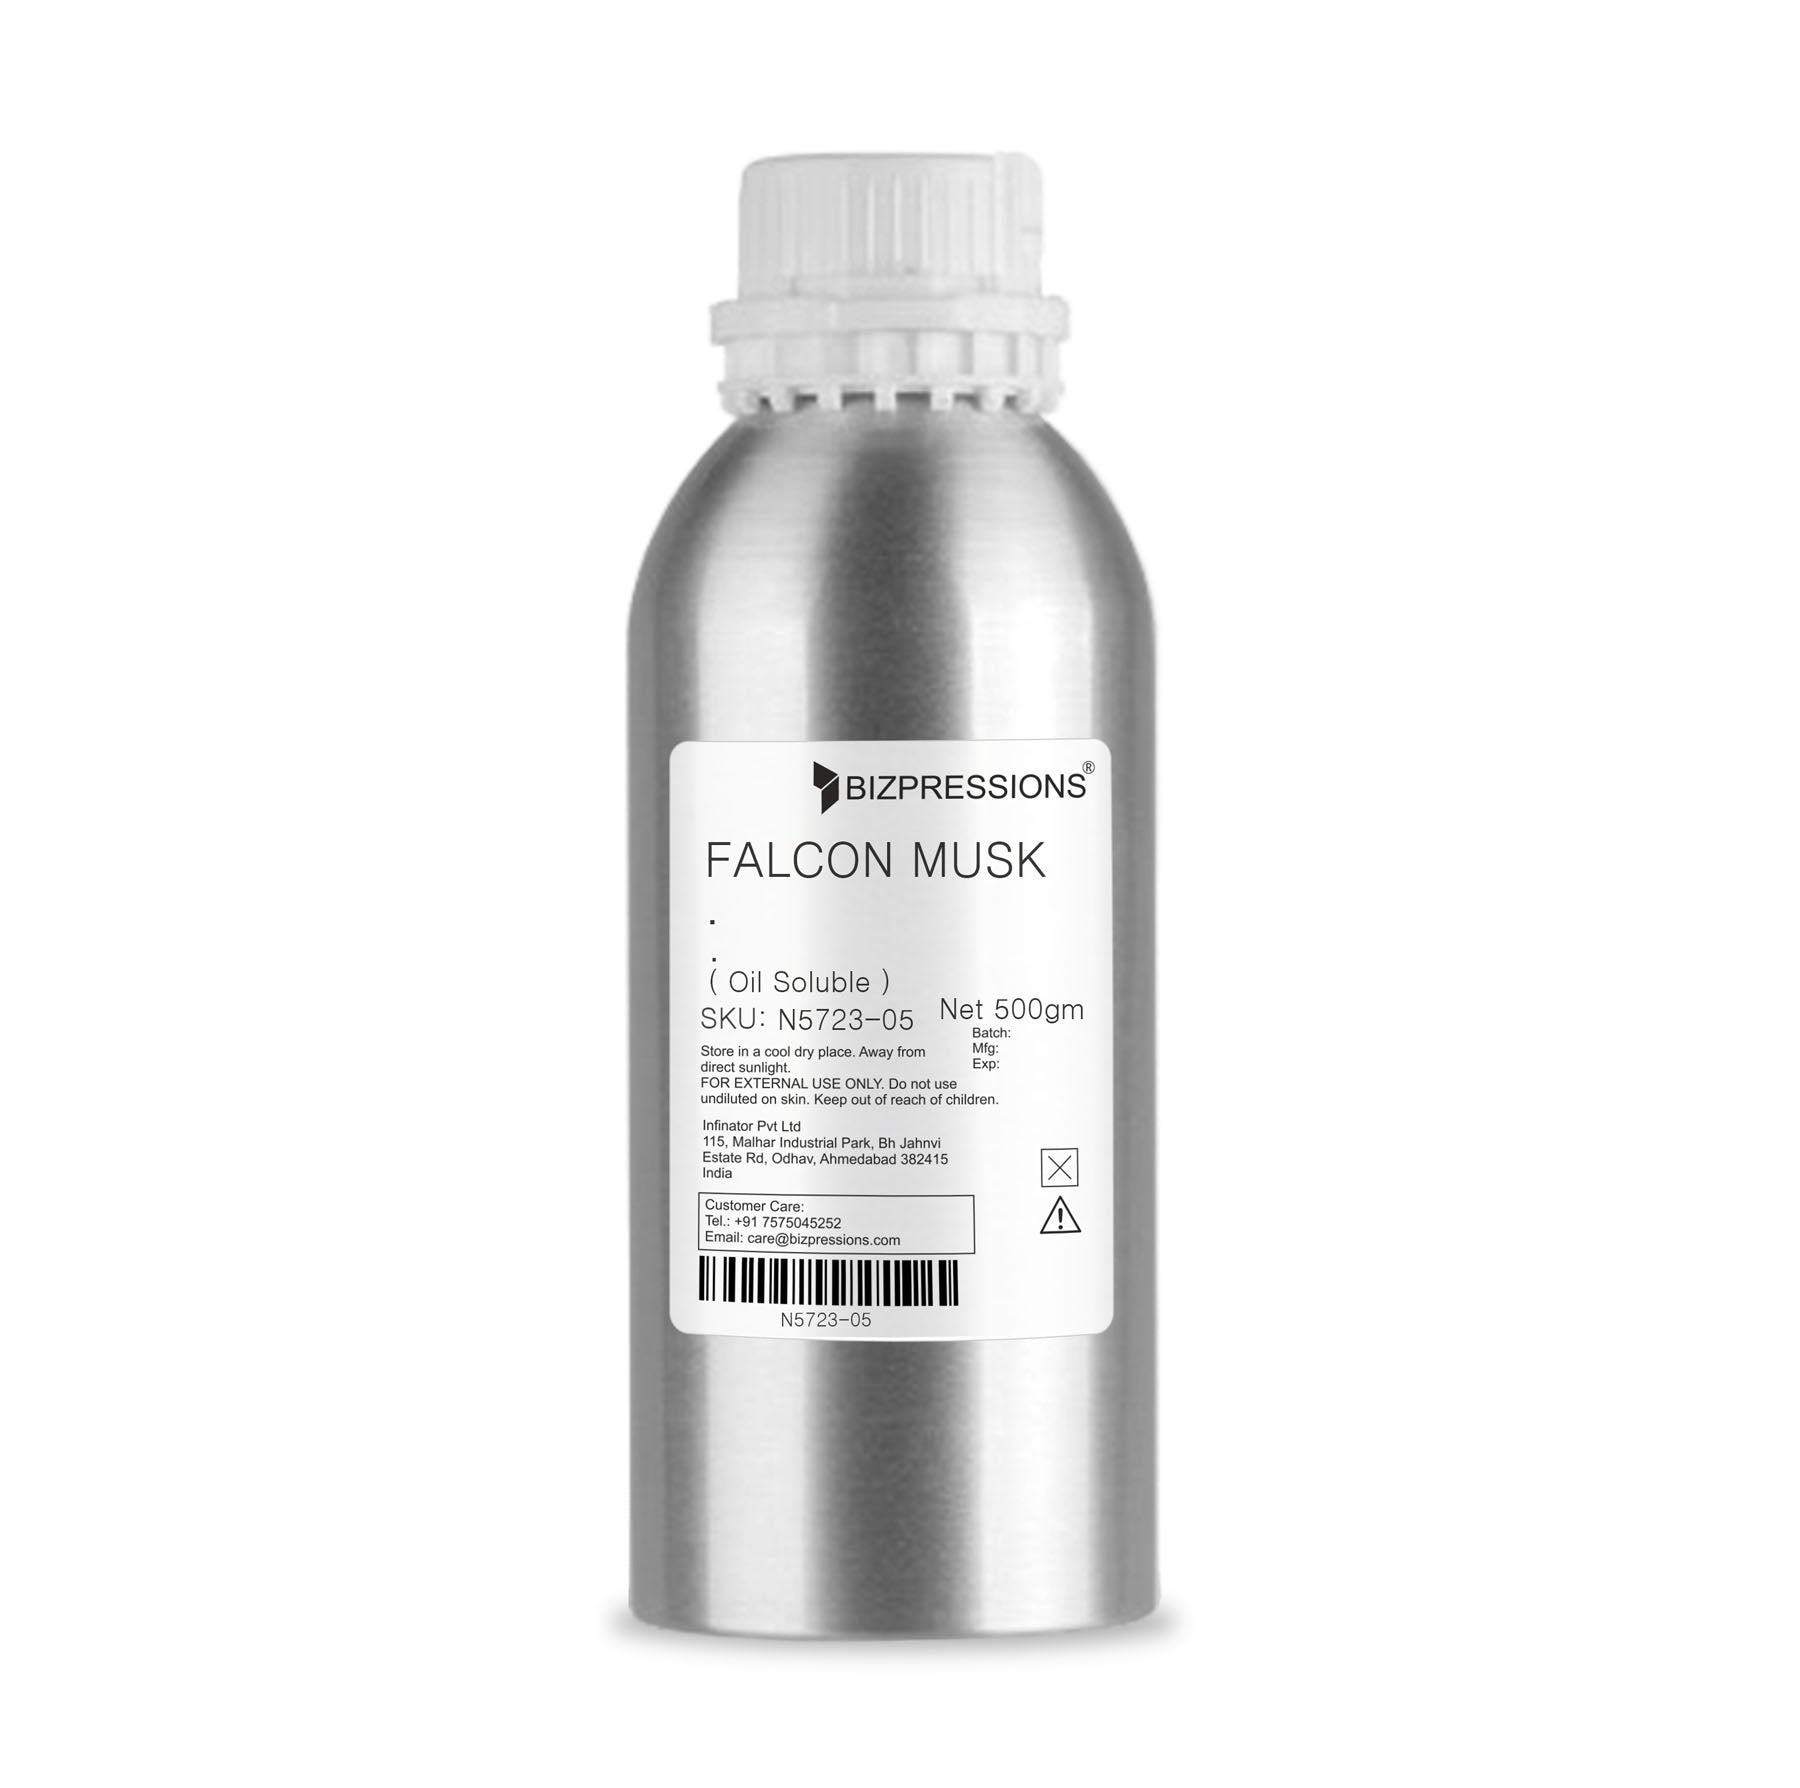 FALCON MUSK - Fragrance ( Oil Soluble ) - 500 gm